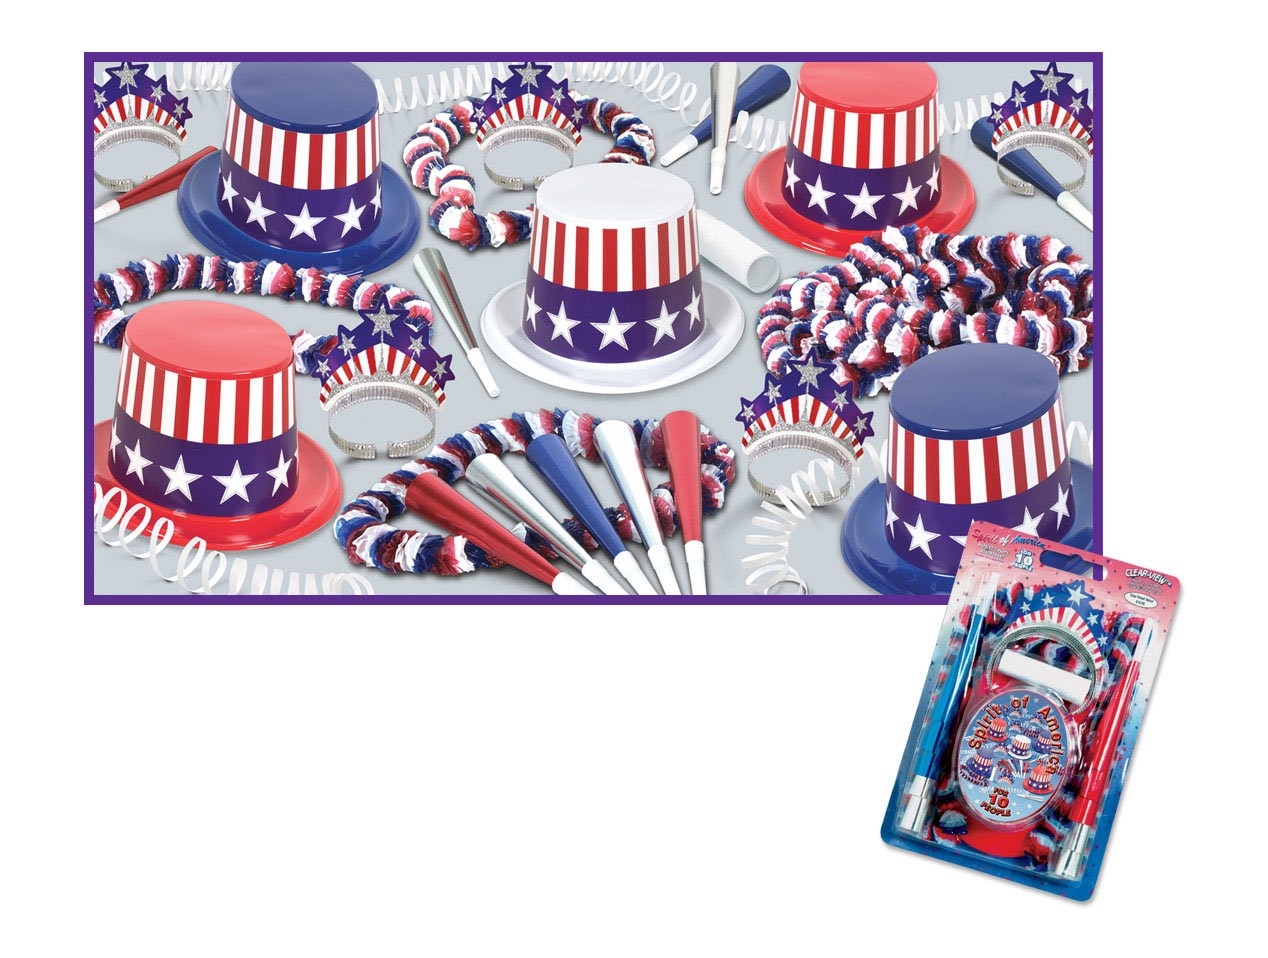 Spirit of America Patriotic Party Assortment for 10 People